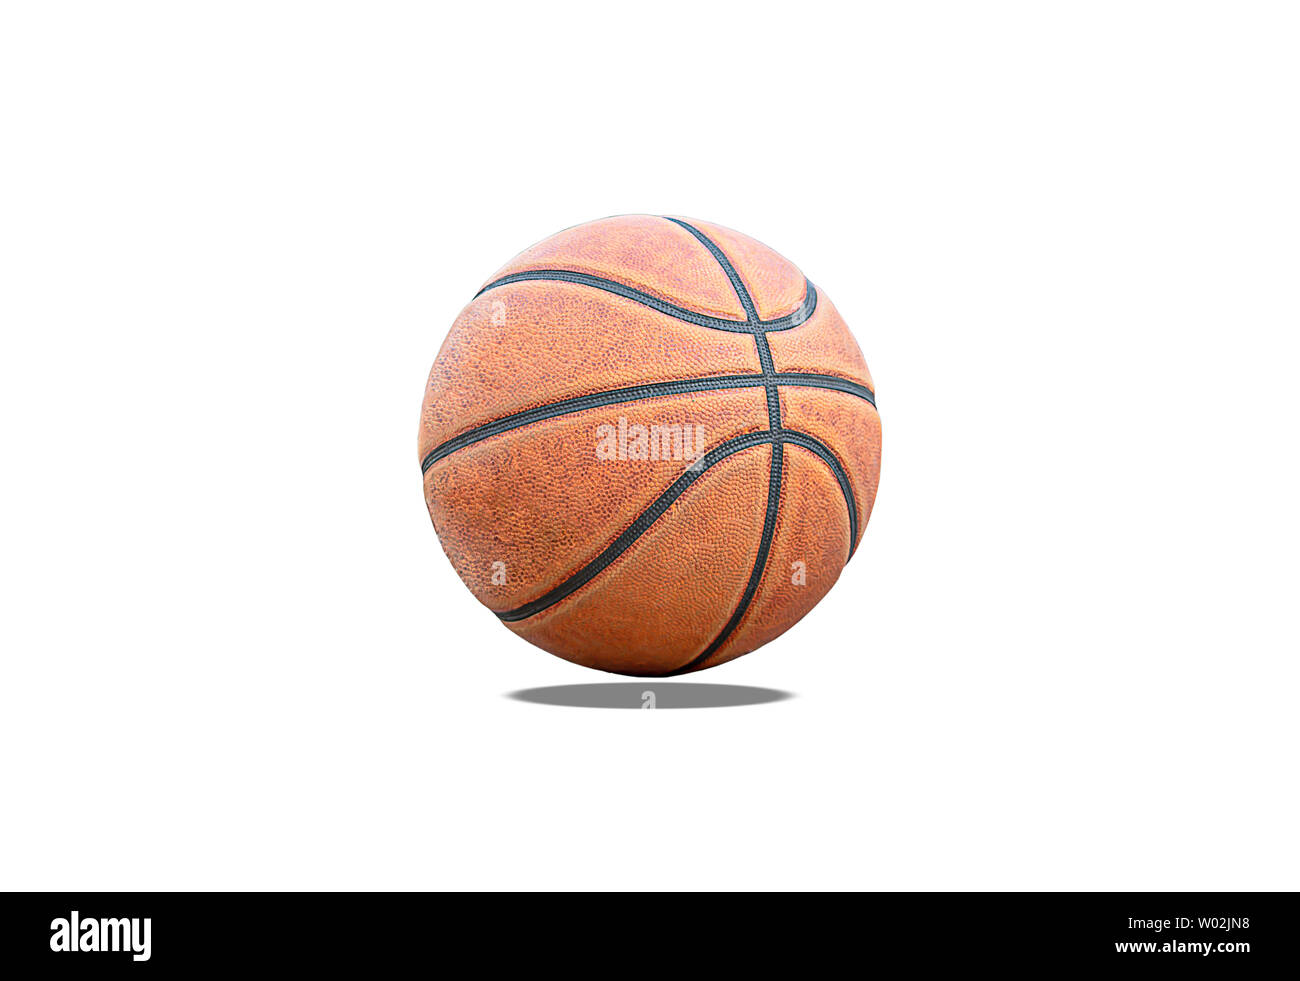 Basketball leather on a white background with clipping path. Stock Photo